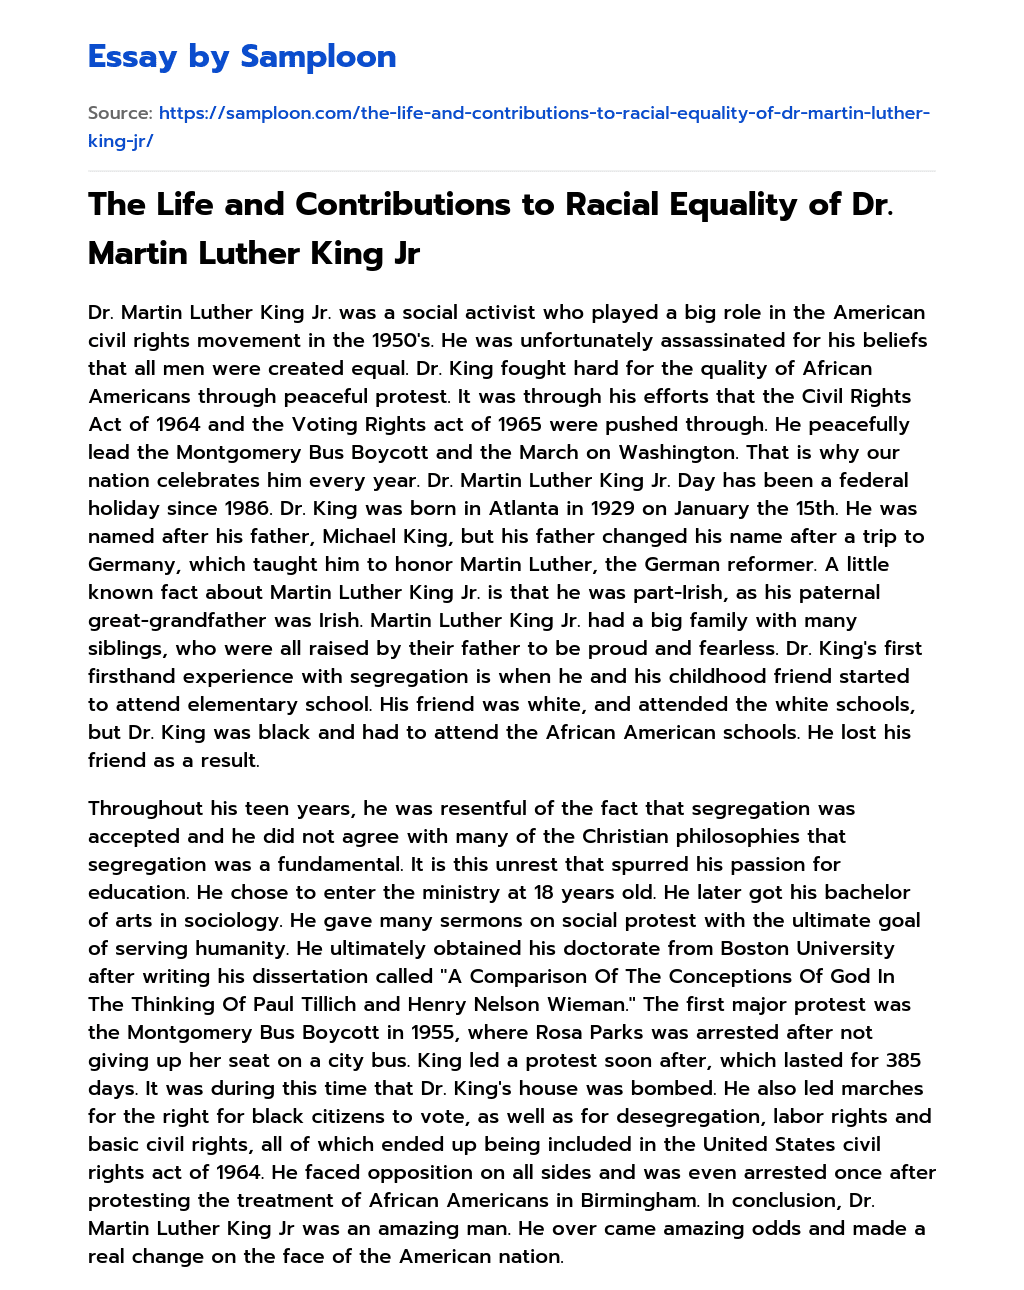 The Life and Contributions to Racial Equality of Dr. Martin Luther King Jr essay